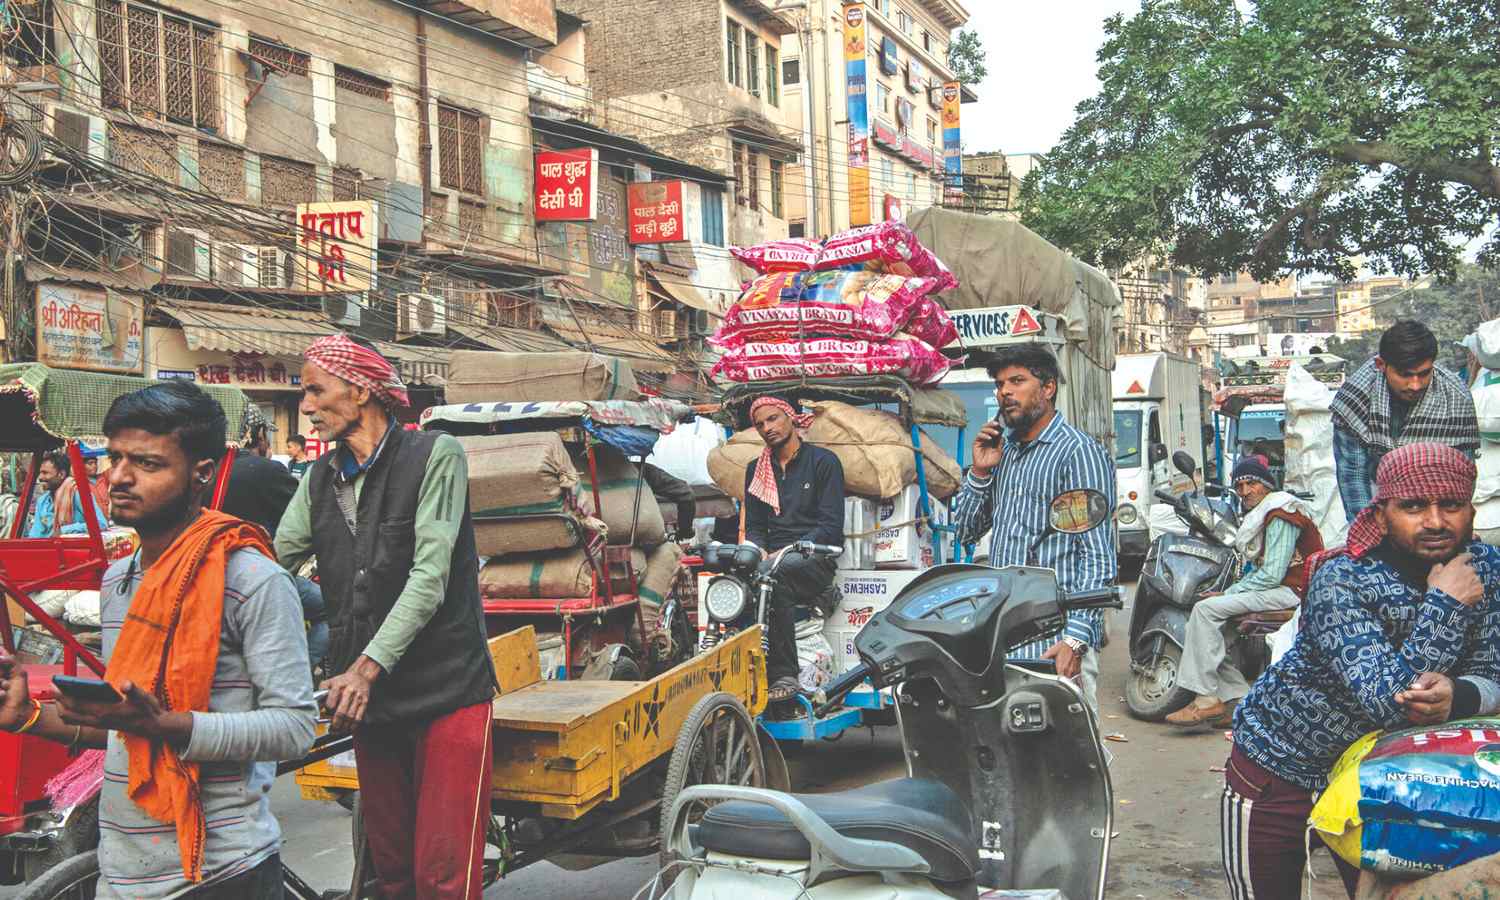 India Chasing China's Crown: The race for the world's top consumer market